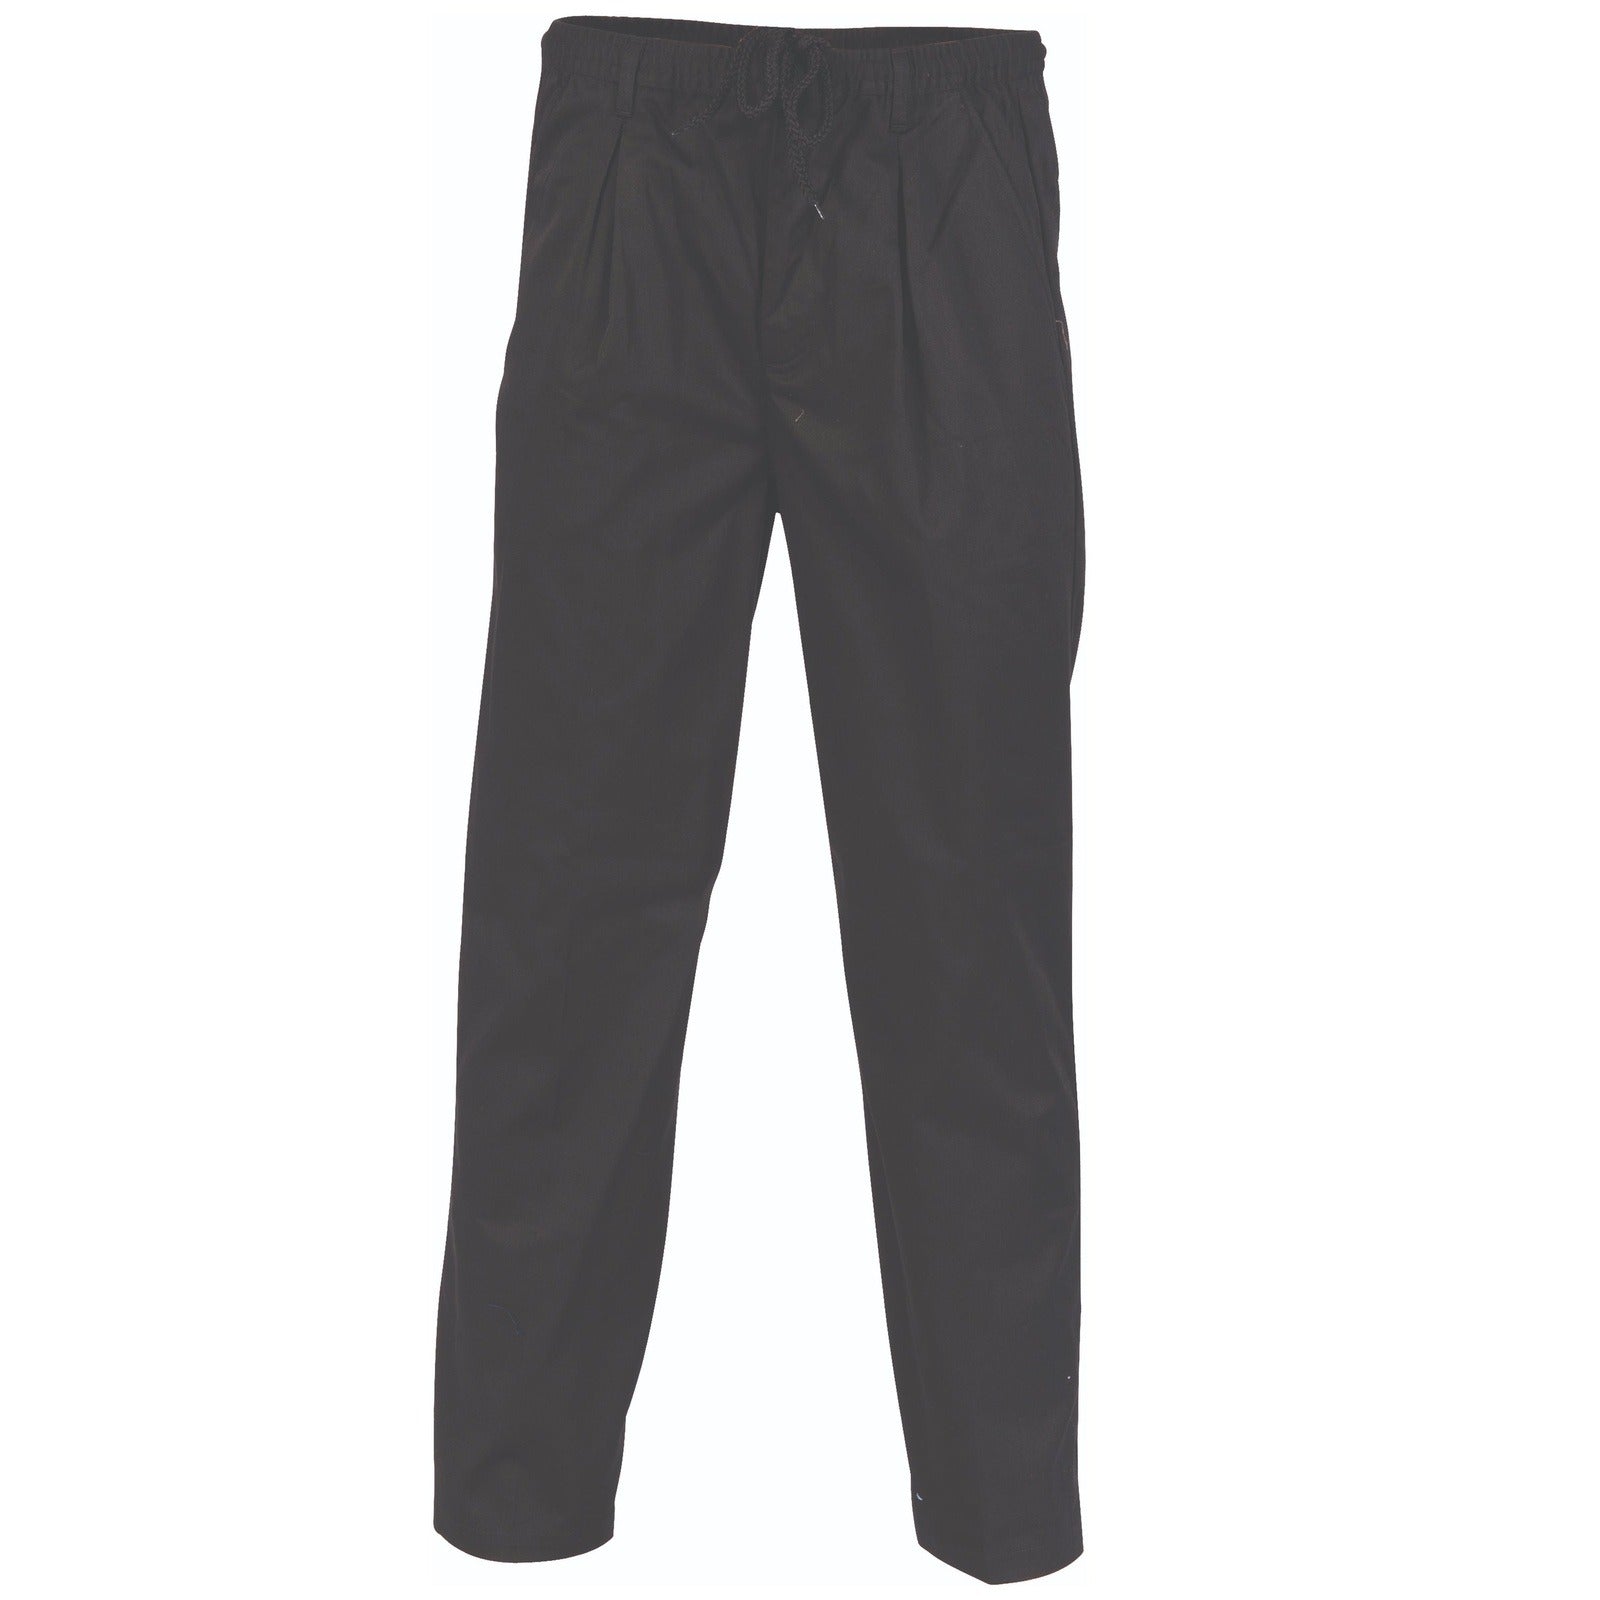 DNC Polyester Cotton 3-in-1 Pants - 1503 | Womens Workwear